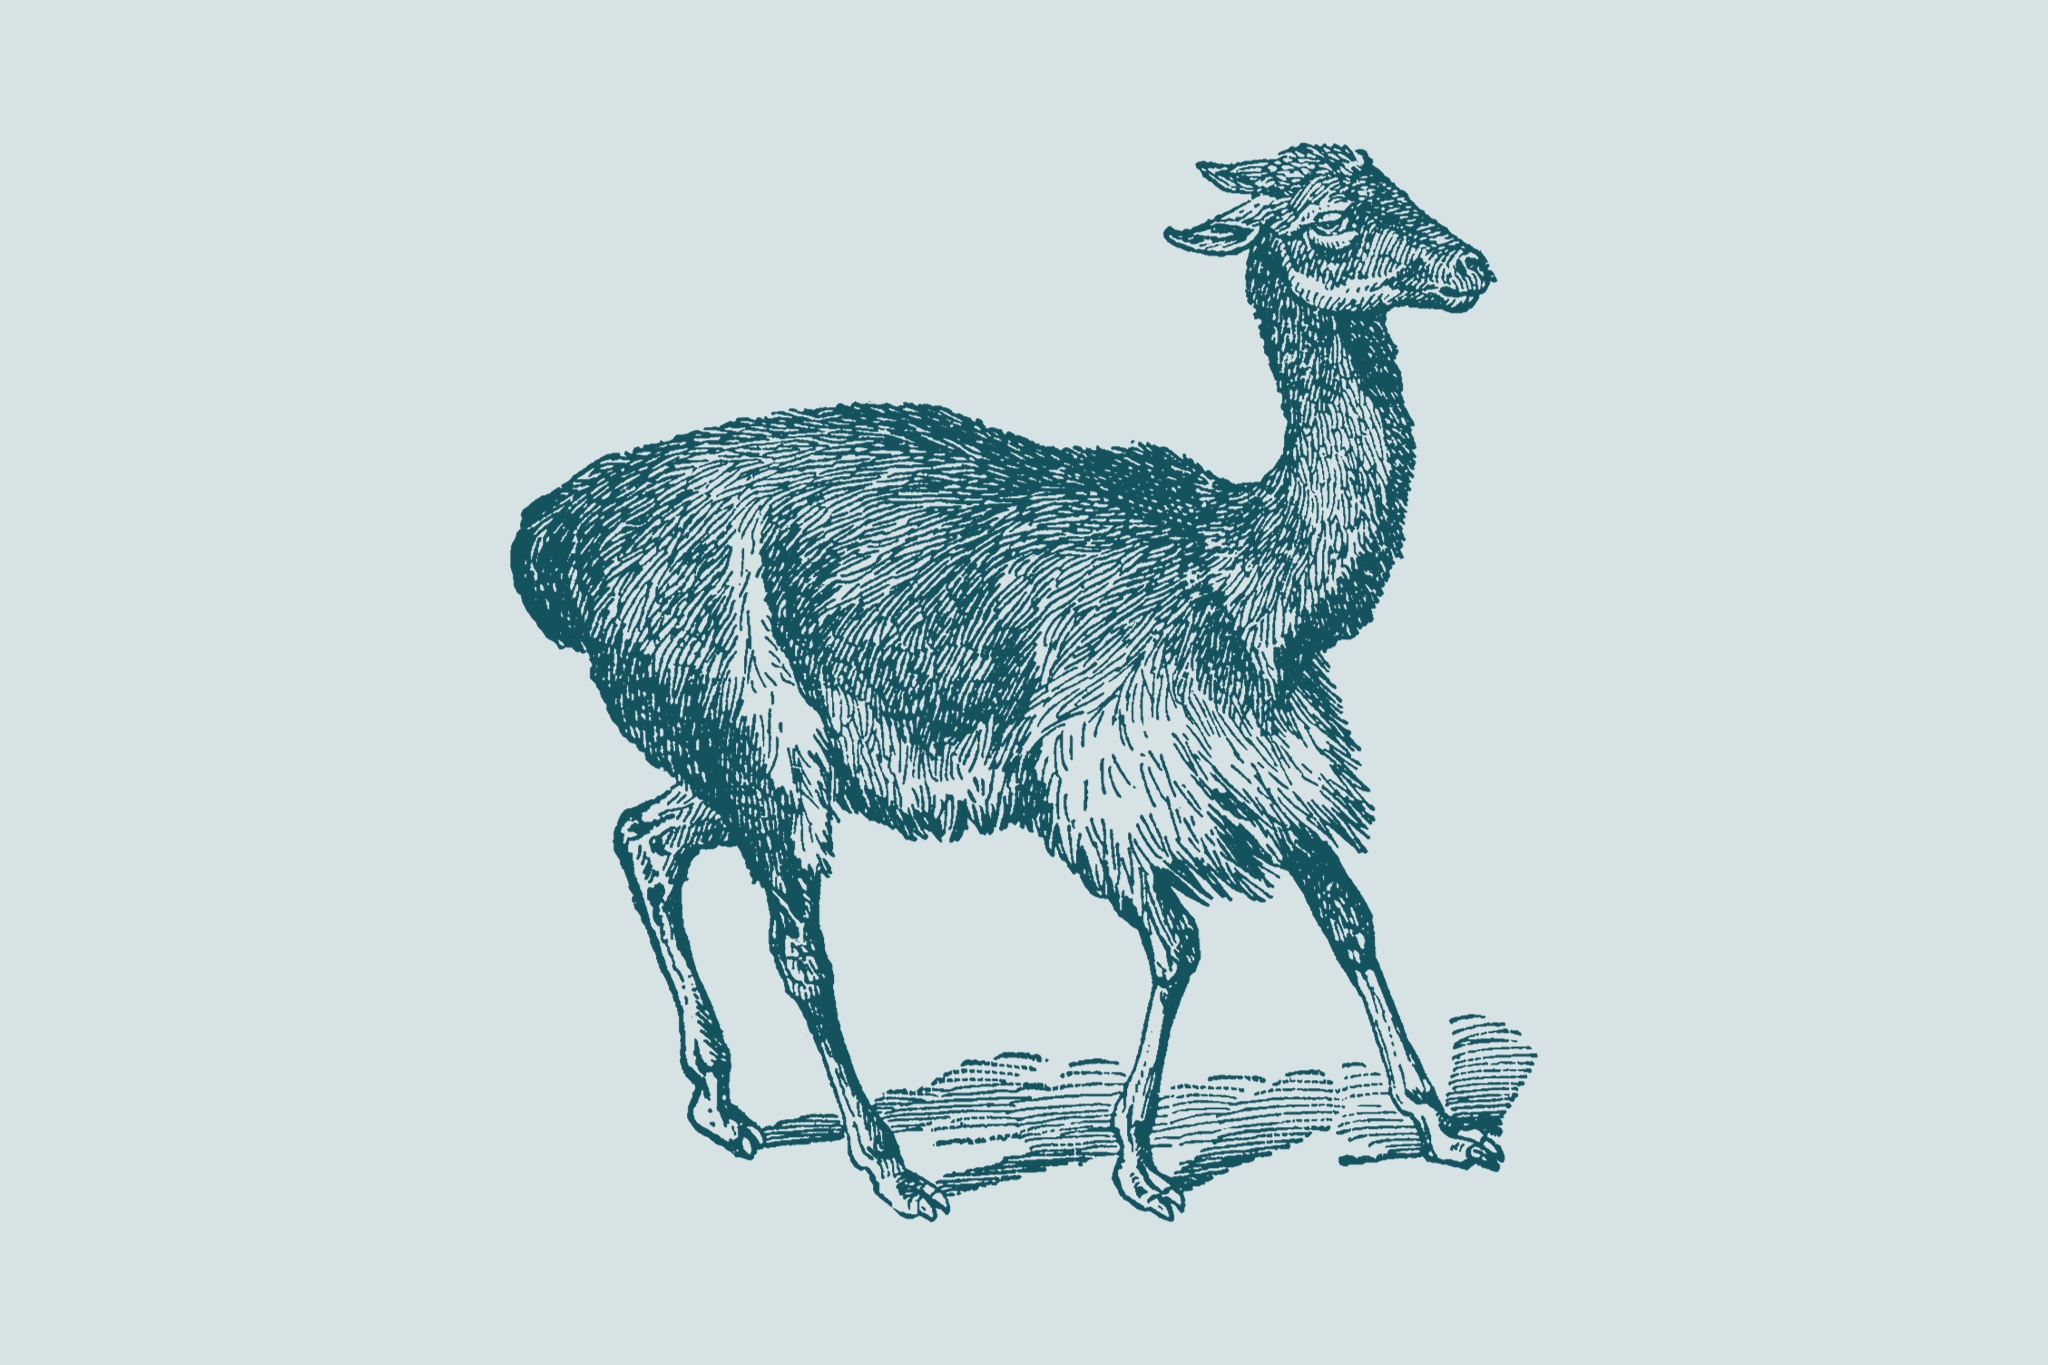 An illustration of a vicuña